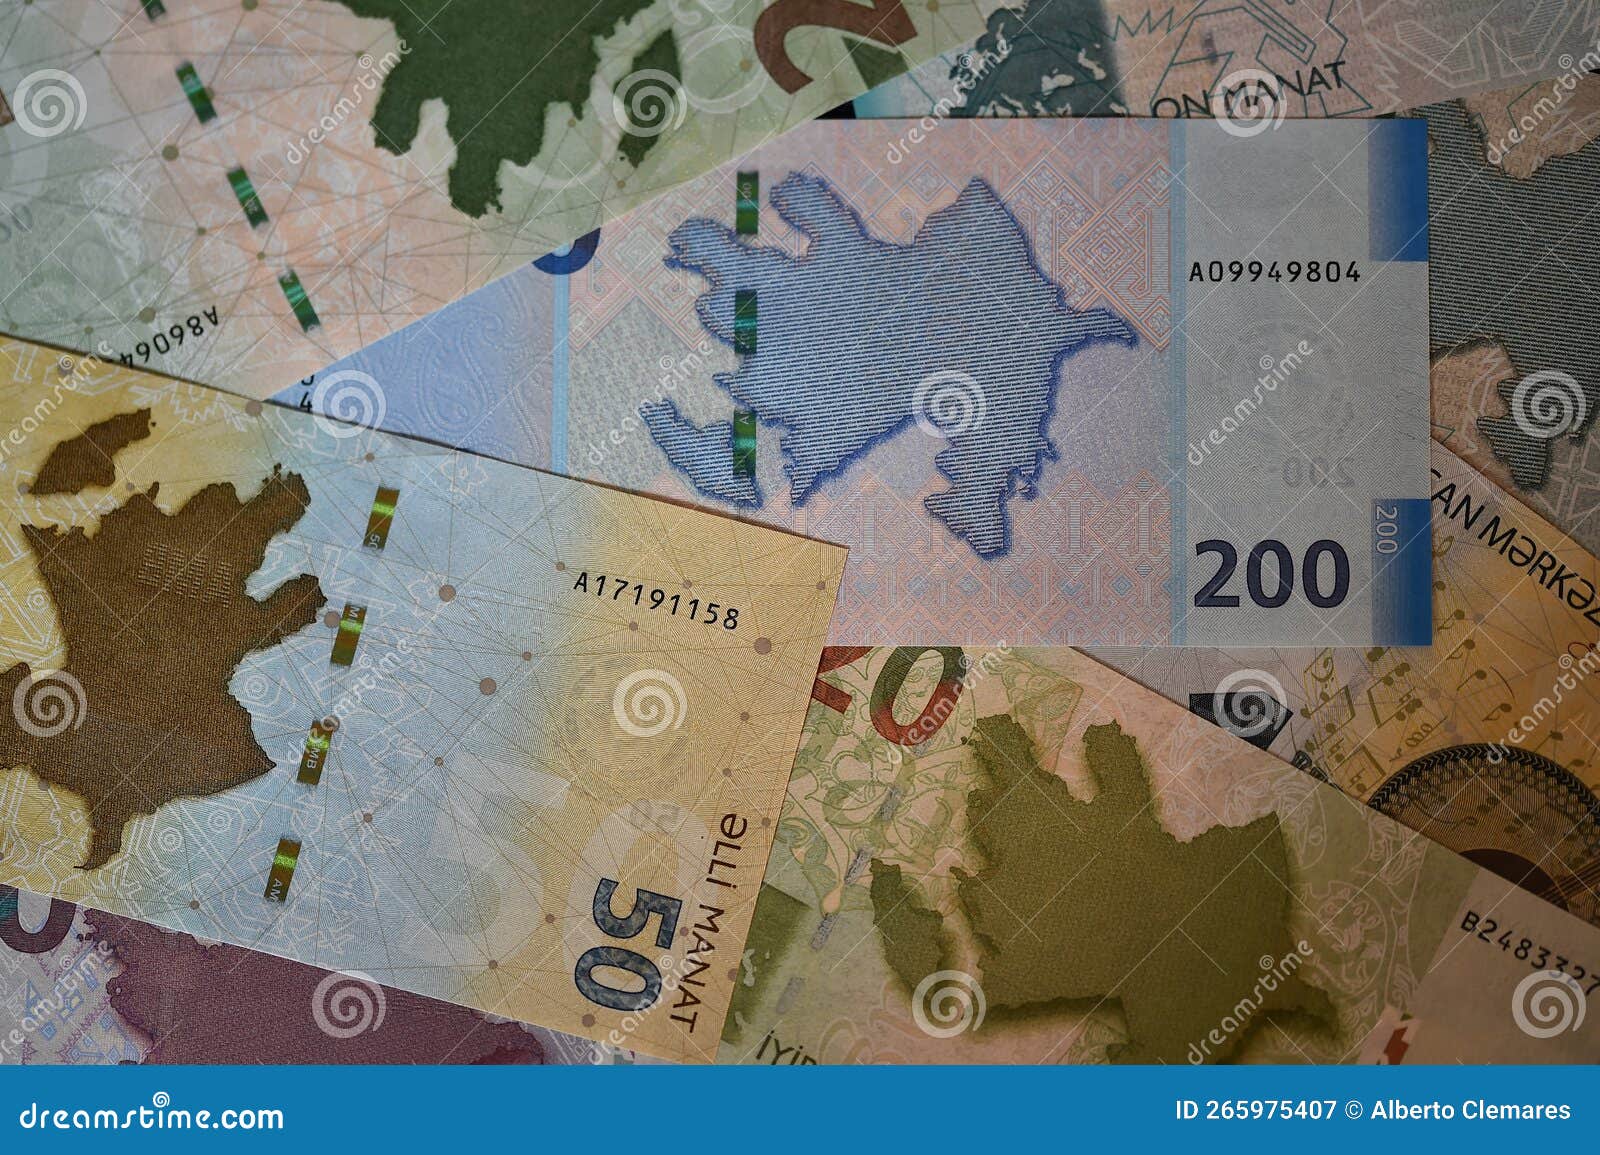 some current banknotes of azerbaijan